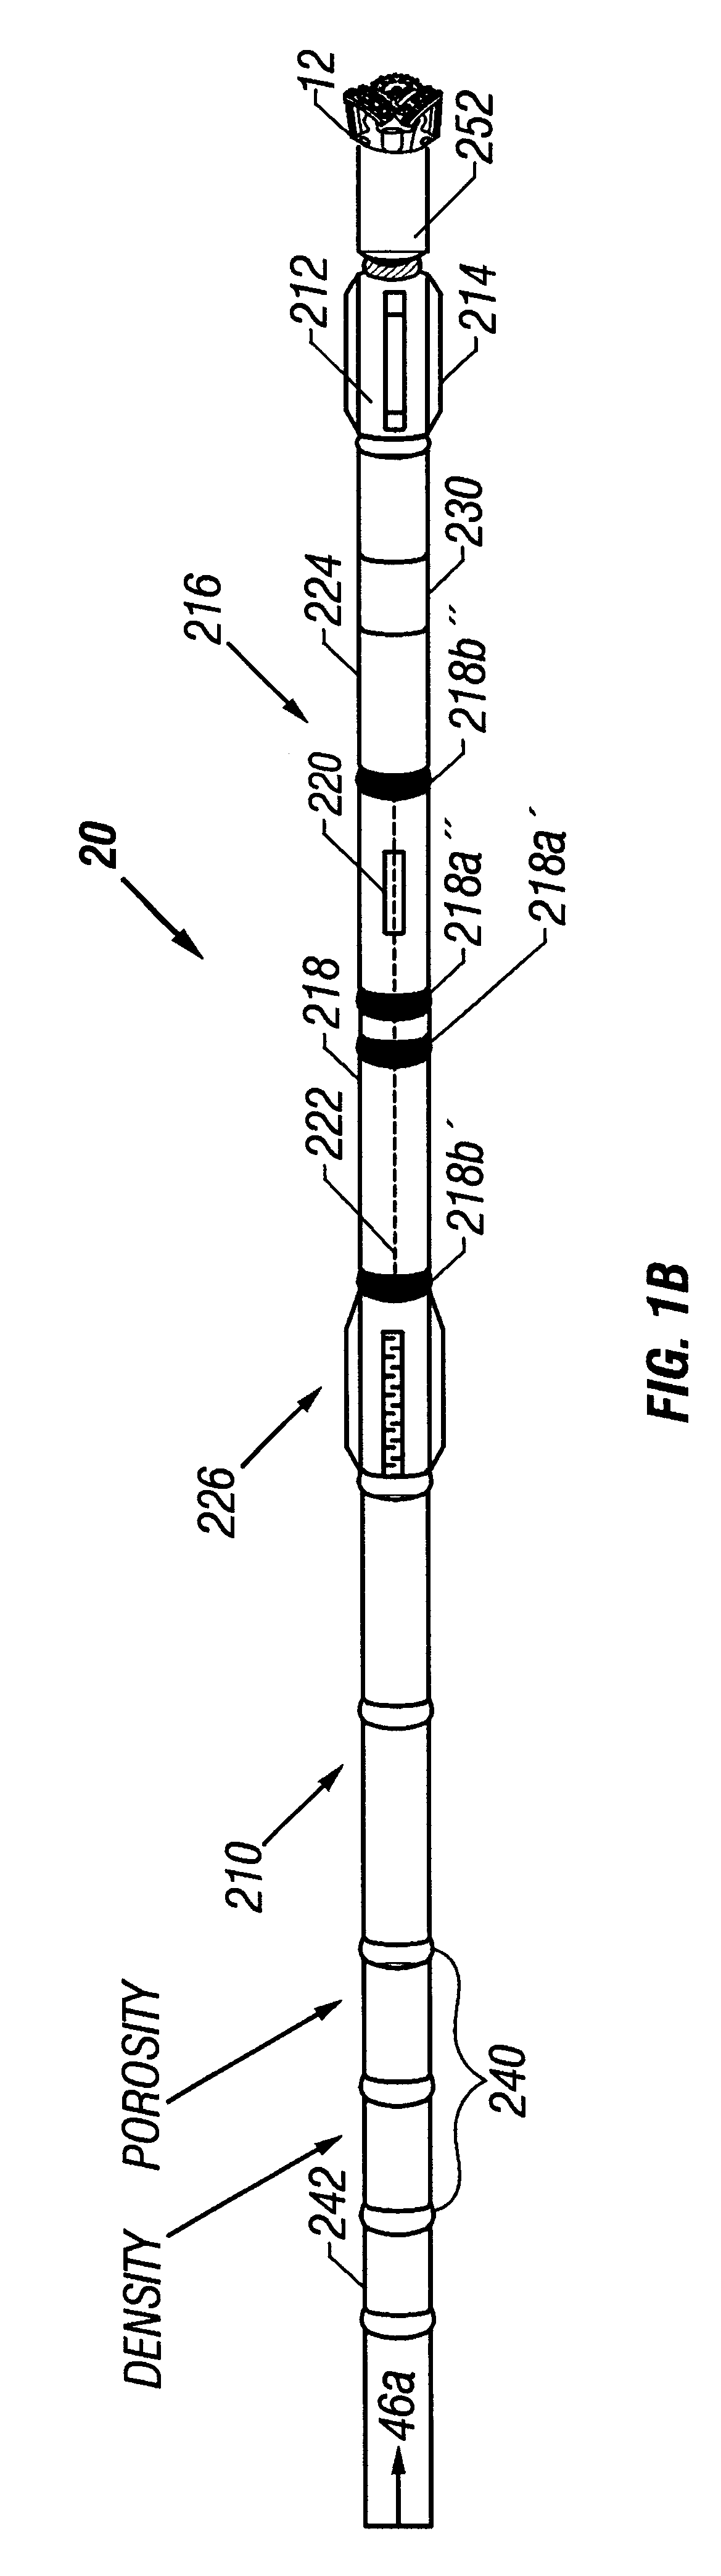 Drilling system with downhole apparatus for determining parameters of interest and for adjusting drilling direction in response thereto